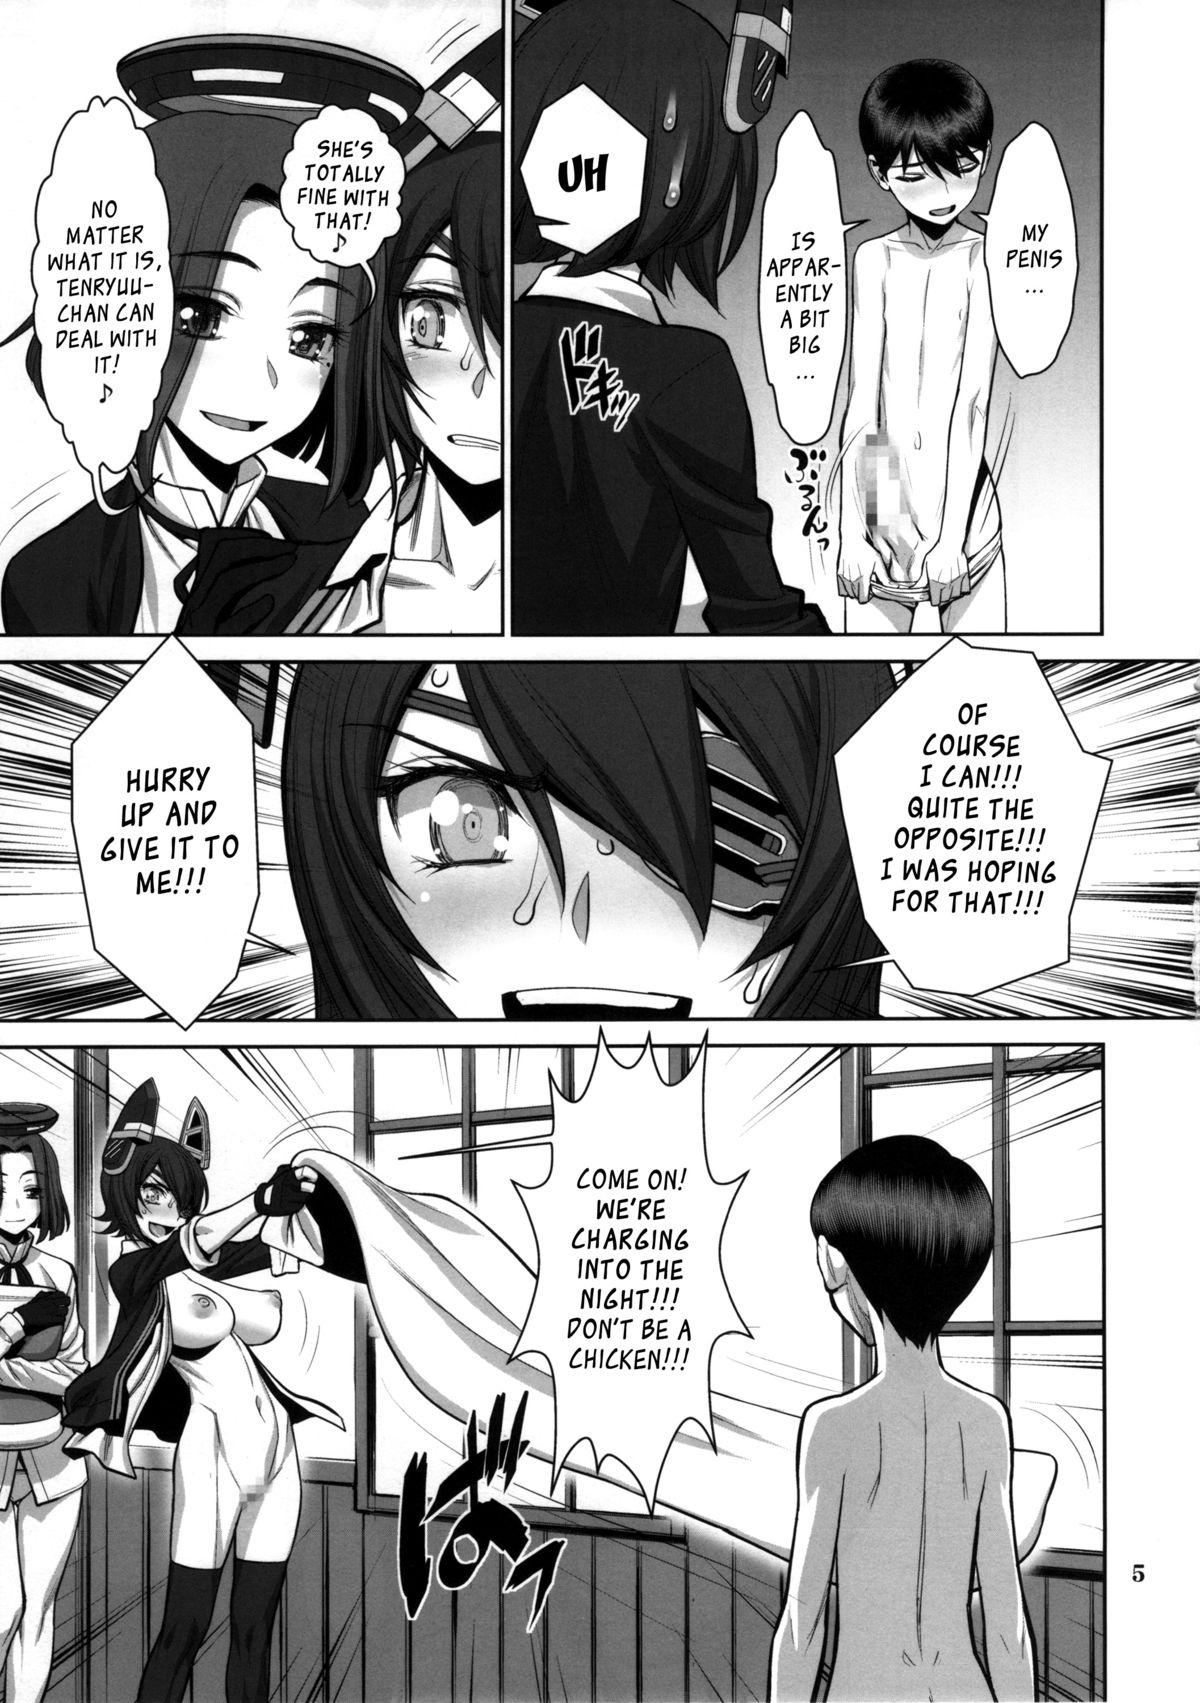 Hot Girl Fucking ONTFK - My Name is Tenryuu! Fufufu... You Scared? - Kantai collection Hard Core Porn - Page 4